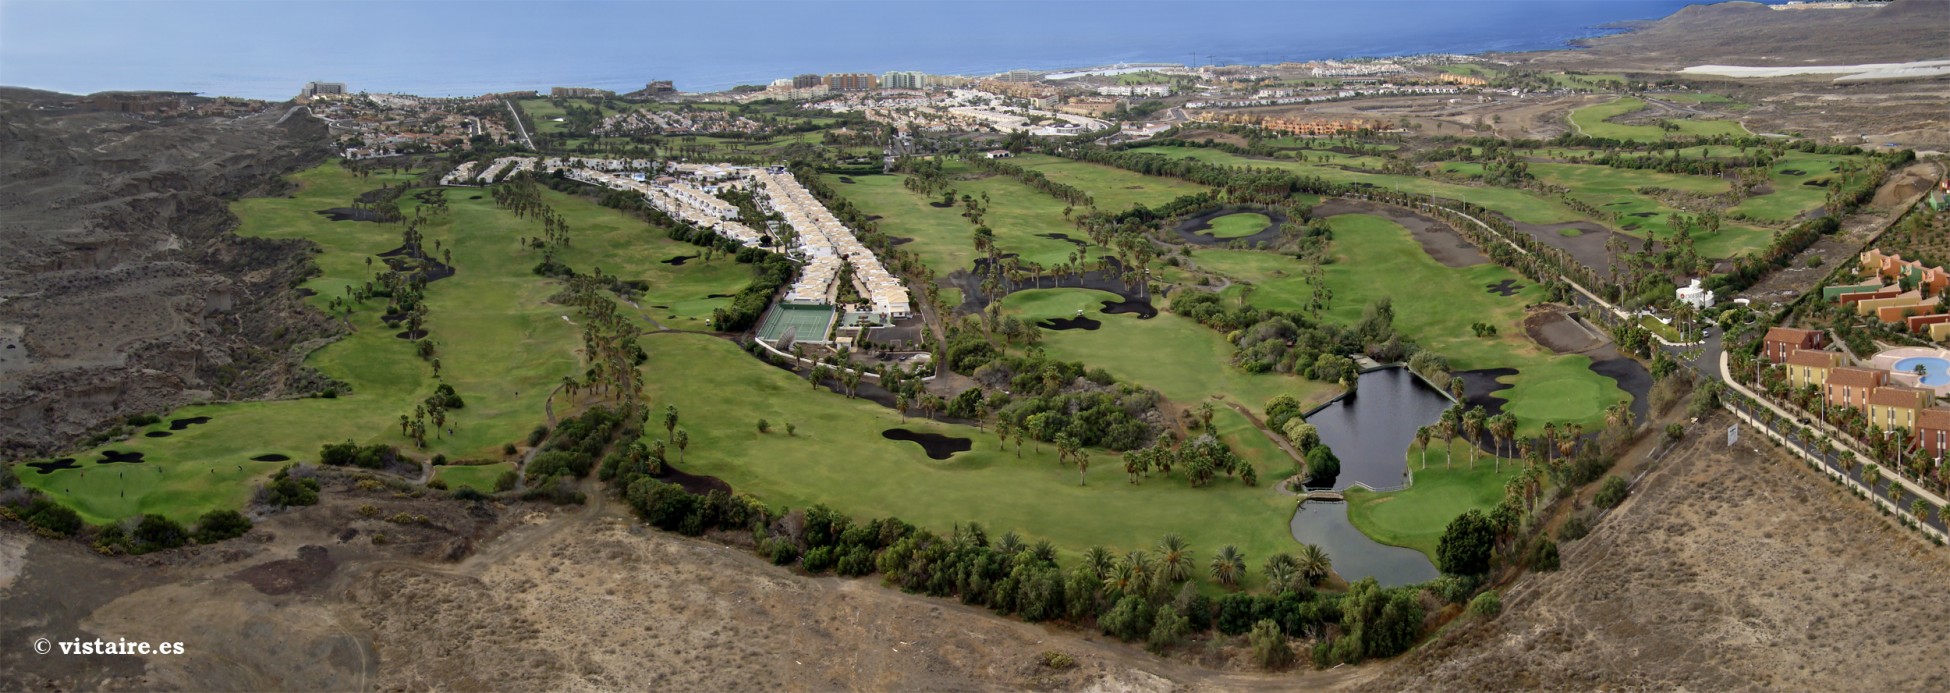 View of Golf del Sur on the island of Tenerife